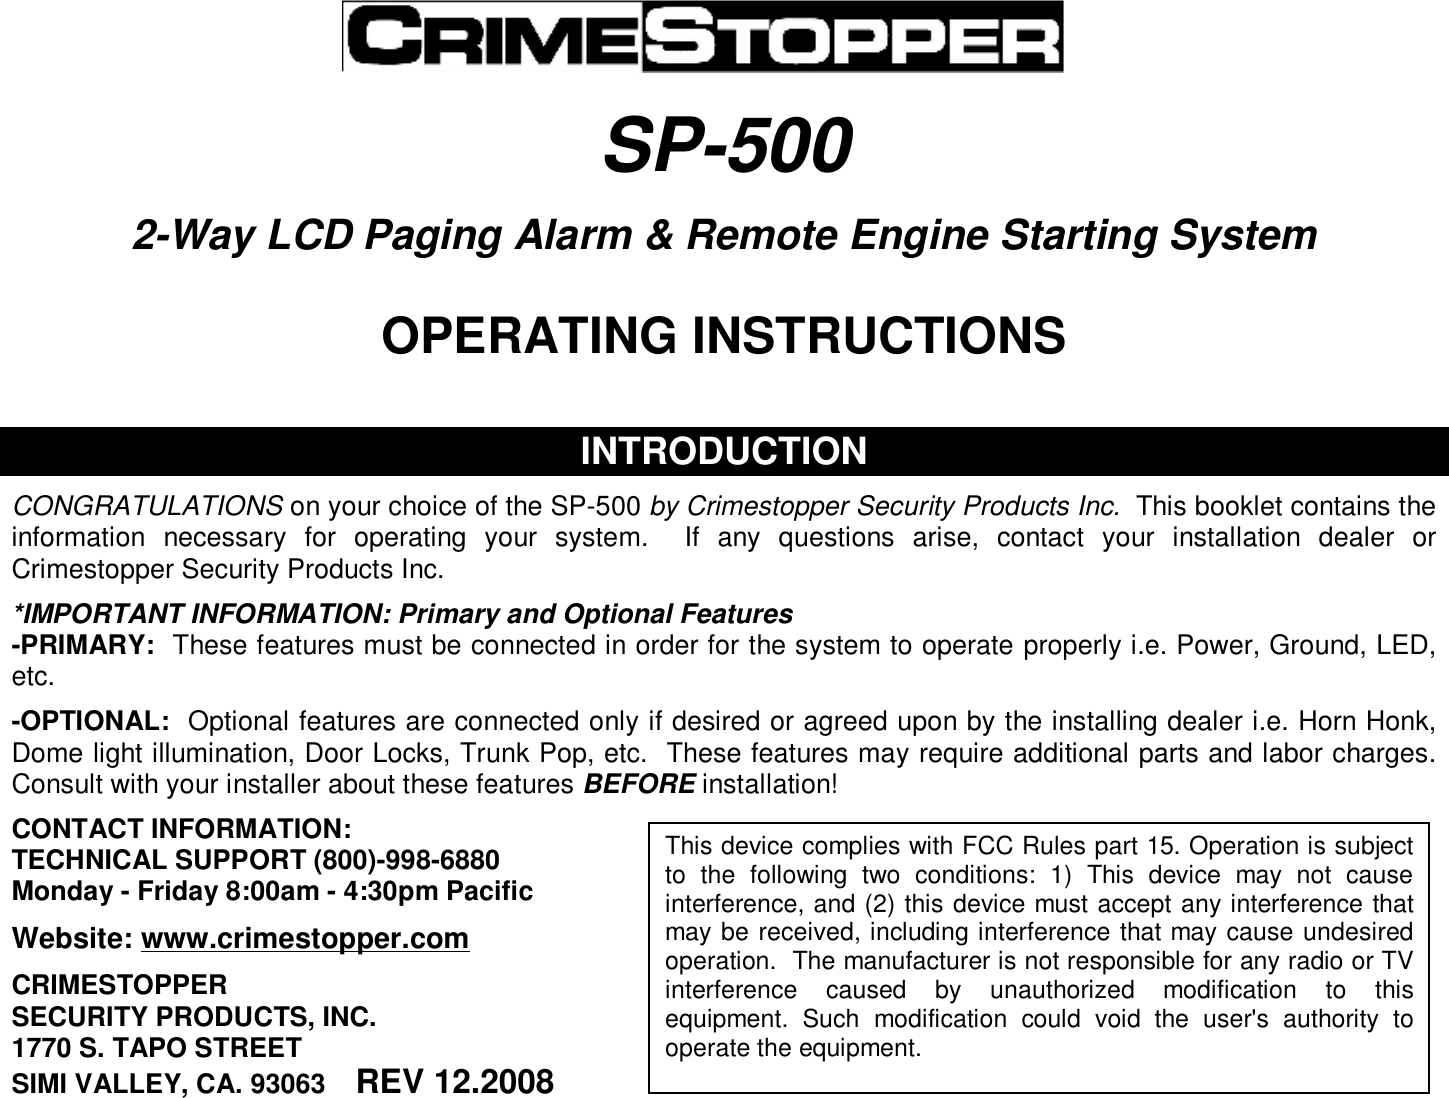    SP-500   2-Way LCD Paging Alarm &amp; Remote Engine Starting System   OPERATING INSTRUCTIONS    INTRODUCTION  CONGRATULATIONS on your choice of the SP-500 by Crimestopper Security Products Inc.  This booklet contains the information necessary for operating your system.  If any questions arise, contact your installation dealer or Crimestopper Security Products Inc.  *IMPORTANT INFORMATION: Primary and Optional Features -PRIMARY:  These features must be connected in order for the system to operate properly i.e. Power, Ground, LED, etc.  -OPTIONAL:  Optional features are connected only if desired or agreed upon by the installing dealer i.e. Horn Honk, Dome light illumination, Door Locks, Trunk Pop, etc.  These features may require additional parts and labor charges.  Consult with your installer about these features BEFORE installation!  CONTACT INFORMATION: TECHNICAL SUPPORT (800)-998-6880 Monday - Friday 8:00am - 4:30pm Pacific  Website: www.crimestopper.com  CRIMESTOPPER SECURITY PRODUCTS, INC. 1770 S. TAPO STREET SIMI VALLEY, CA. 93063    REV 12.2008   This device complies with FCC Rules part 15. Operation is subject to the following two conditions: 1) This device may not cause interference, and (2) this device must accept any interference that may be received, including interference that may cause undesired operation.  The manufacturer is not responsible for any radio or TV interference caused by unauthorized modification to this equipment. Such modification could void the user&apos;s authority to operate the equipment. 